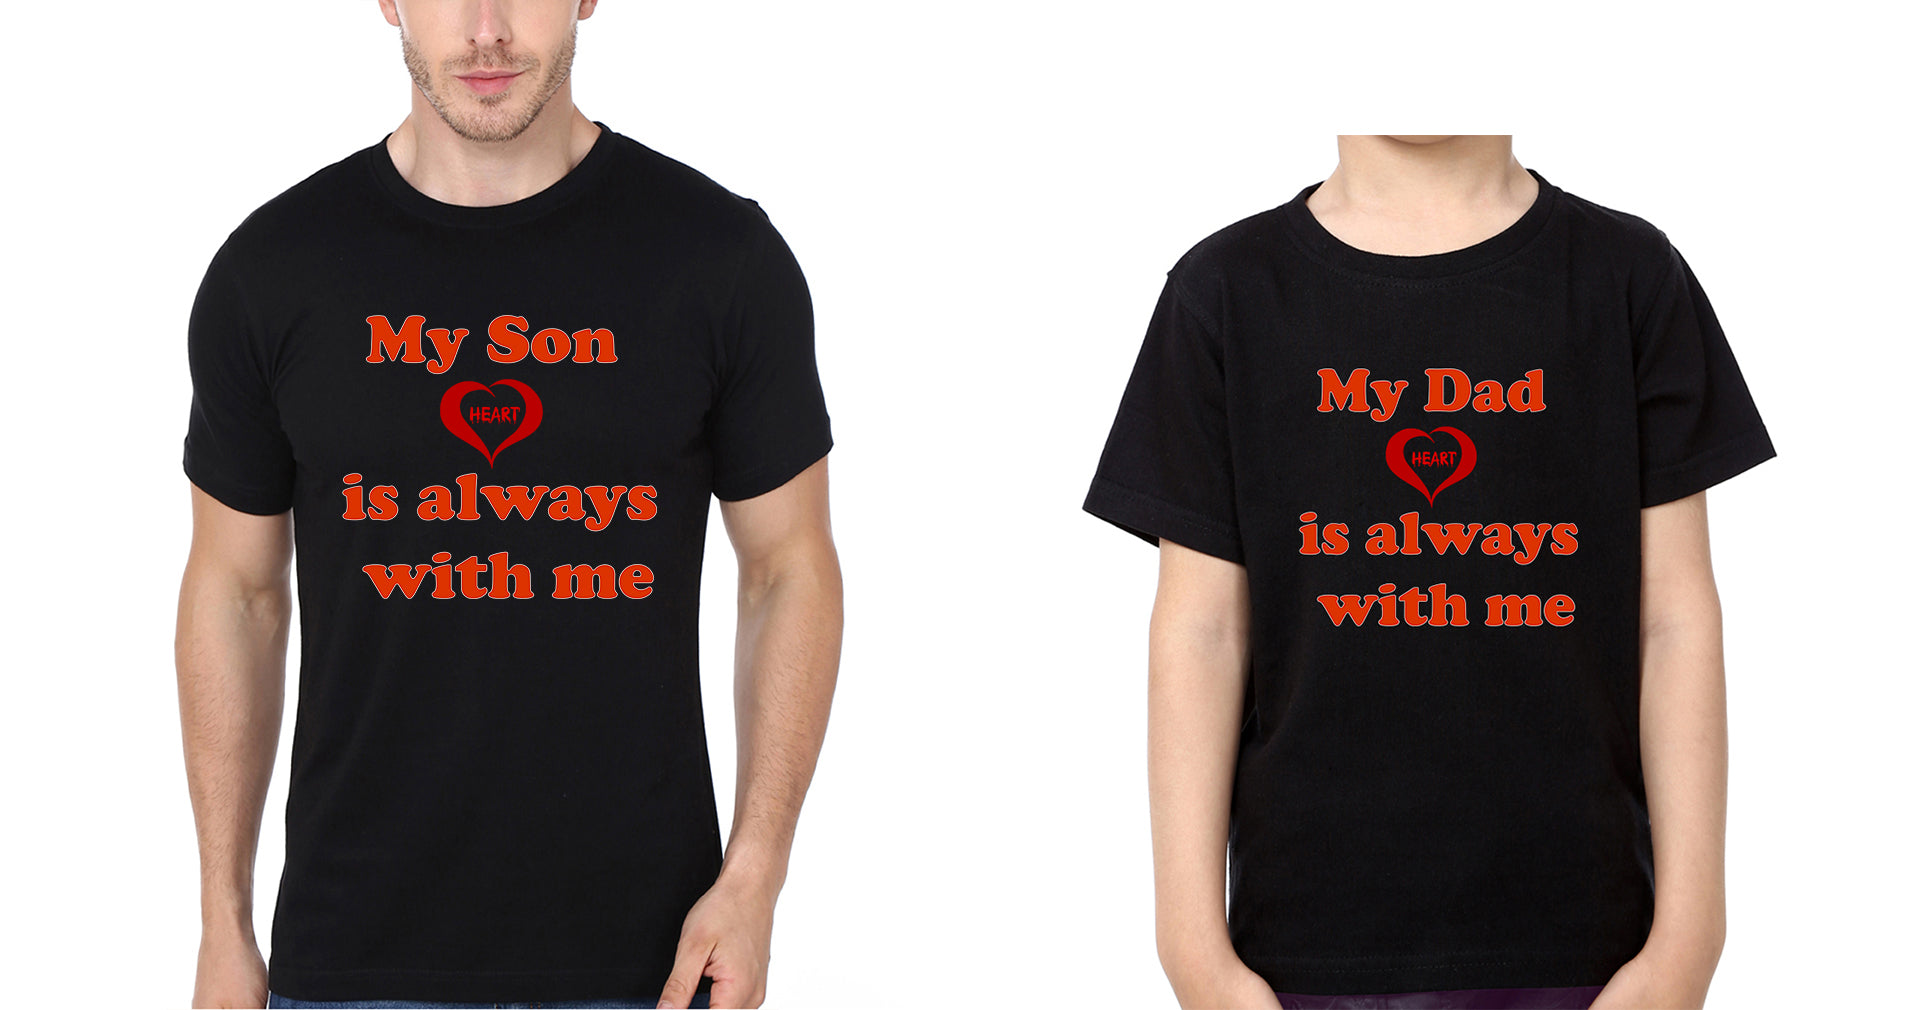 My Daughter Heart is Always With Me My Dad Heart is Always With Me Father and Son Matching T-Shirt- FunkyTradition